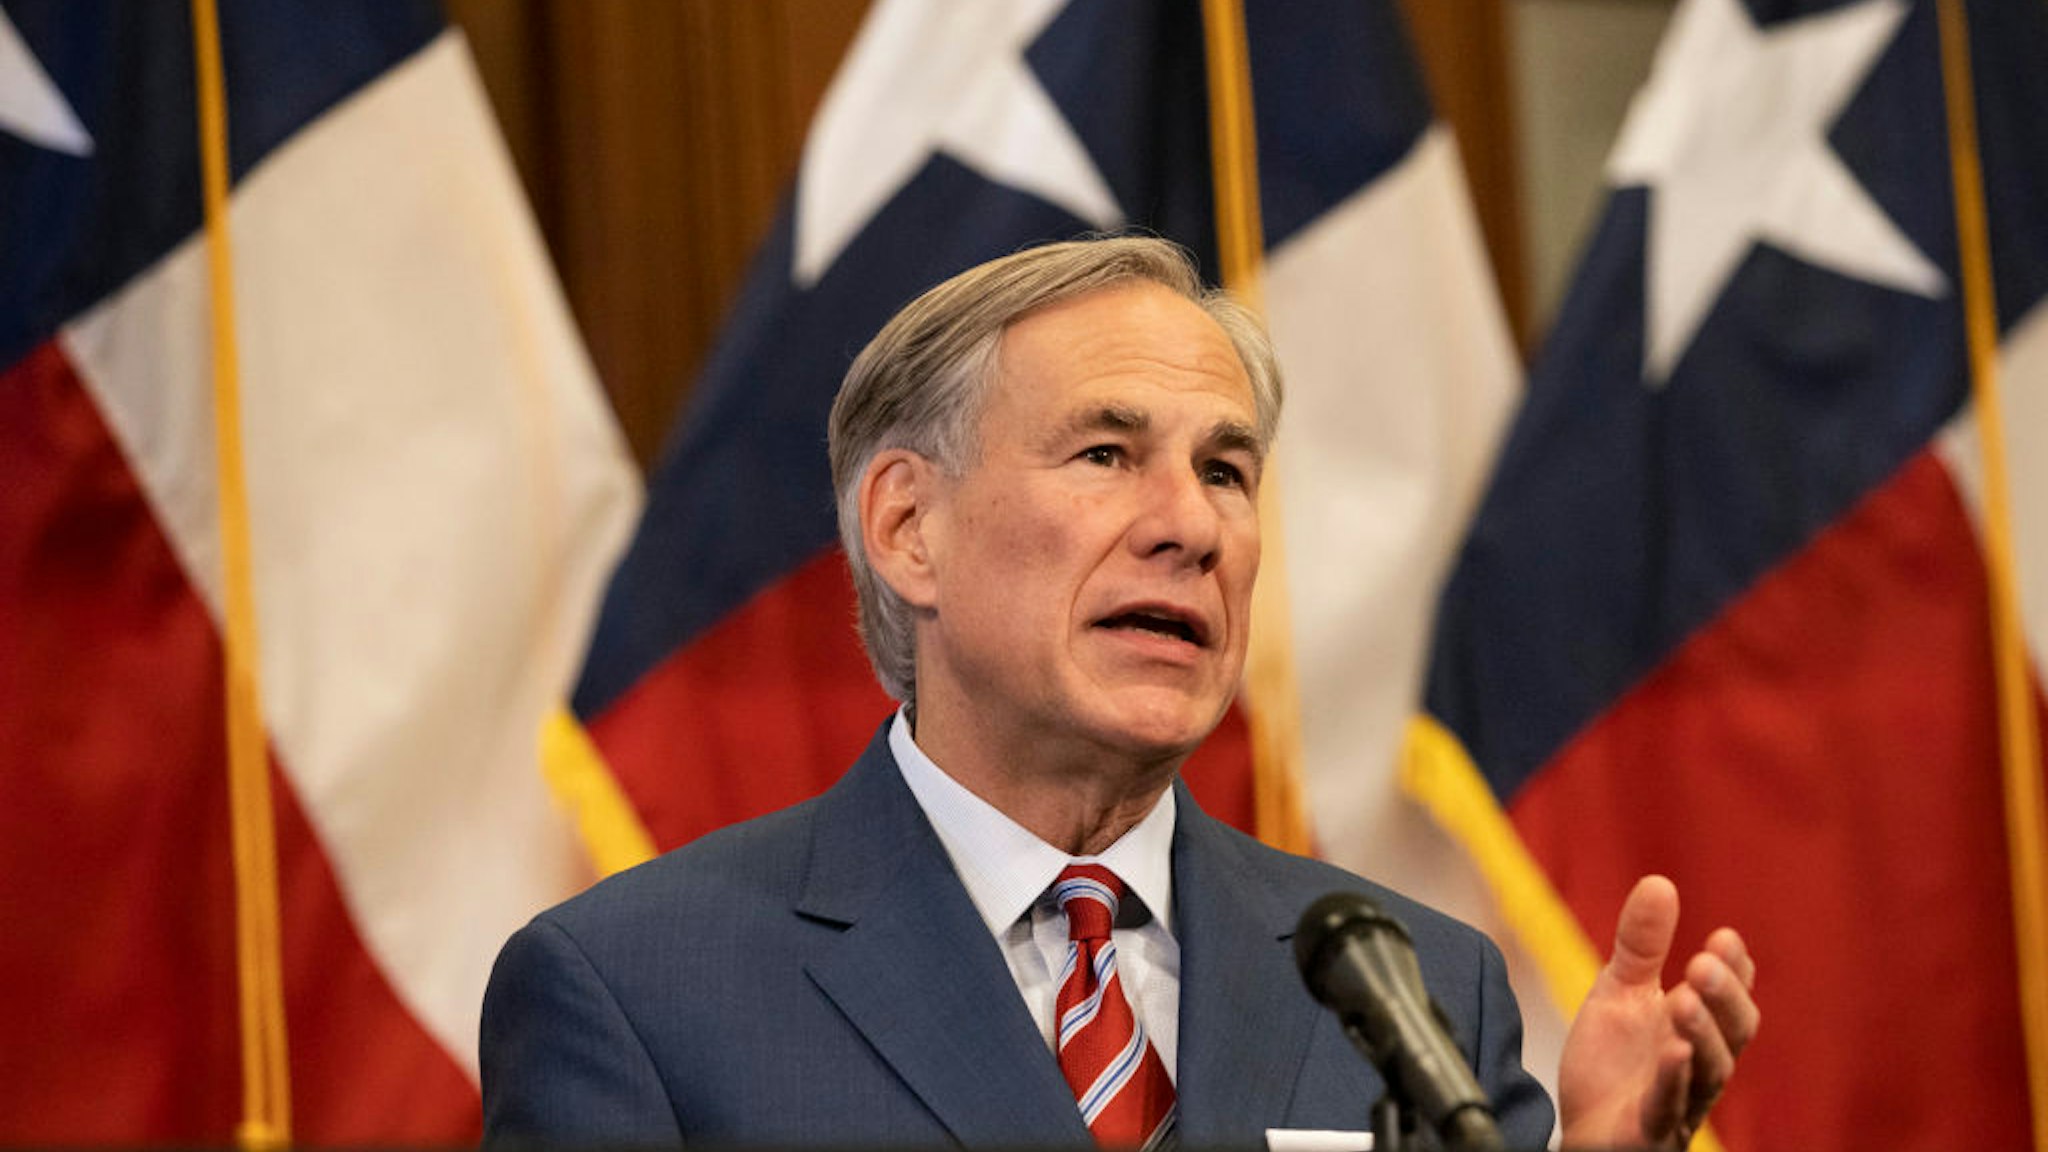 AUSTIN, TX - MAY 18: (EDITORIAL USE ONLY) Texas Governor Greg Abbott announces the reopening of more Texas businesses during the COVID-19 pandemic at a press conference at the Texas State Capitol in Austin on Monday, May 18, 2020. Abbott said that childcare facilities, youth camps, some professional sports, and bars may now begin to fully or partially reopen their facilities as outlined by regulations listed on the Open Texas websit